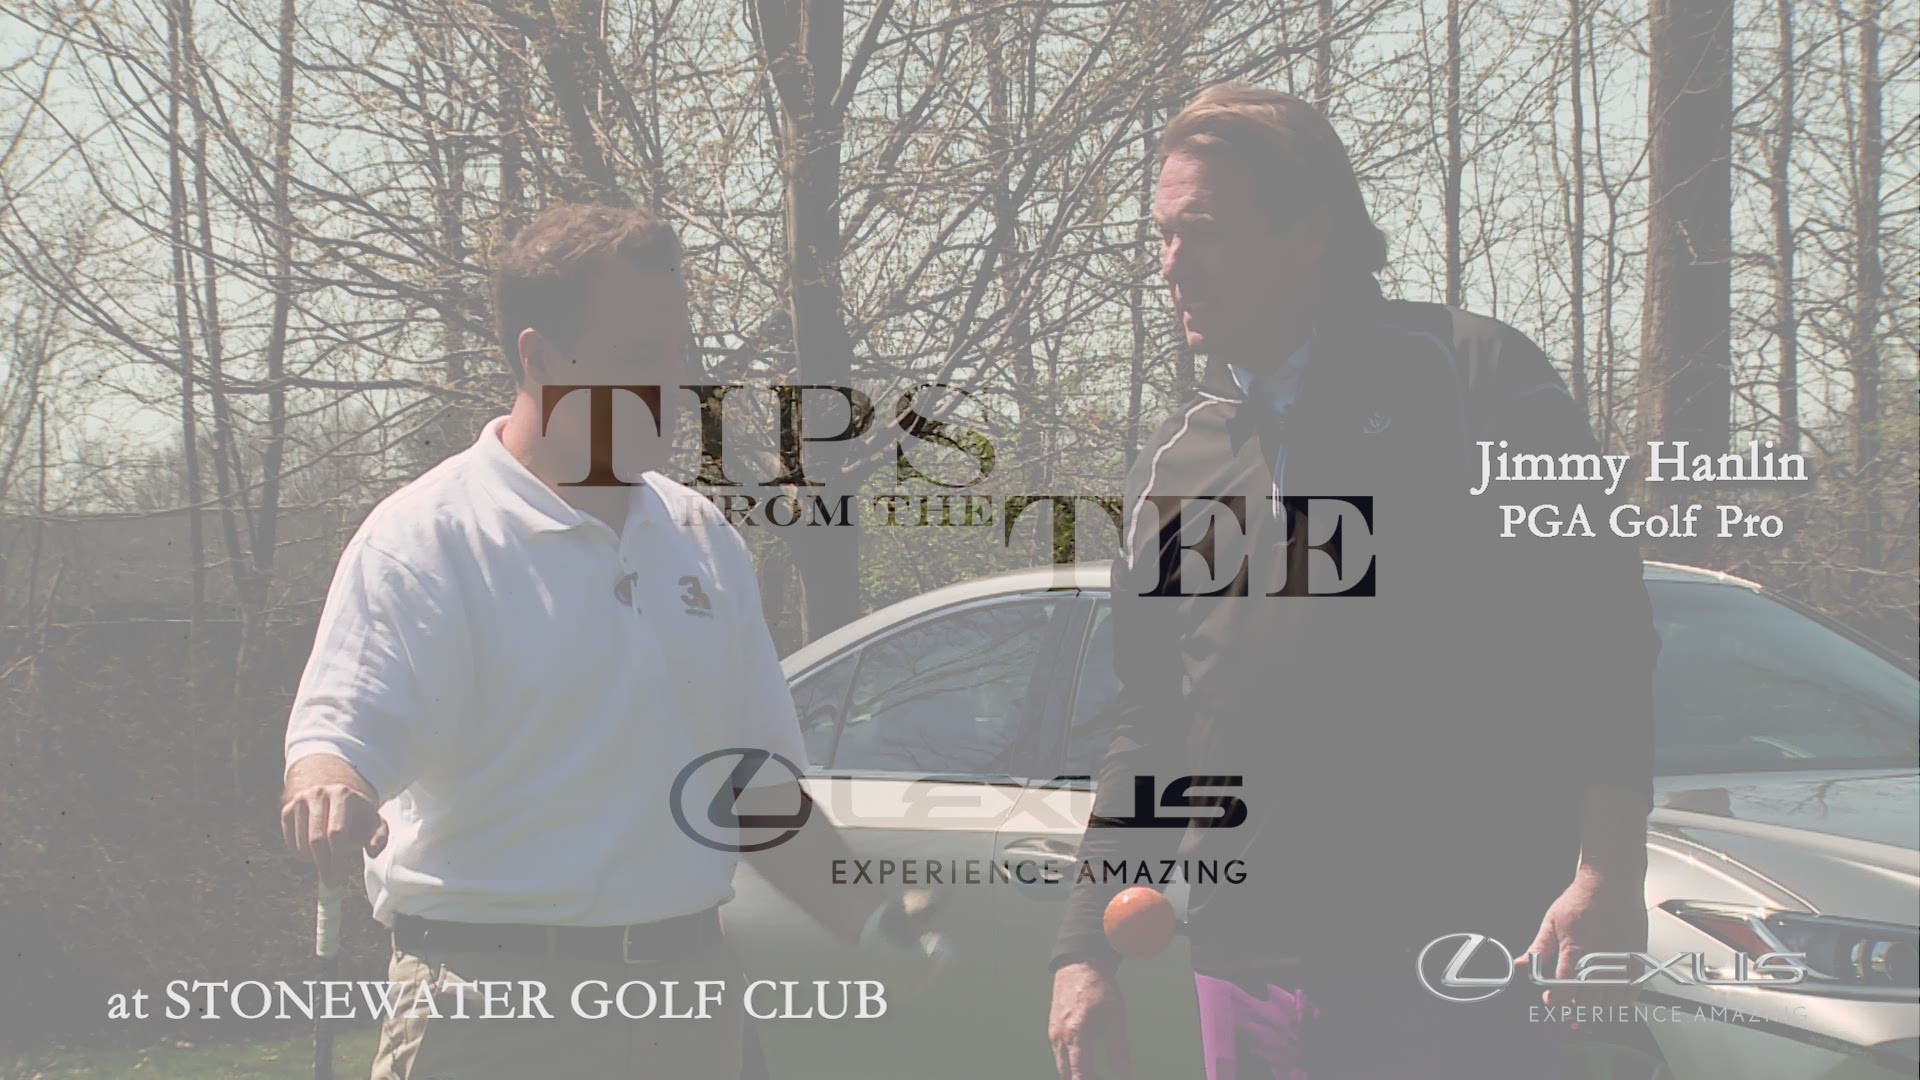 Golf pro Jimmy Hanlin delivers tips to improve your game on the course. In this installment, Hanlin talks about how to effectively transition from your backswing into the ball.